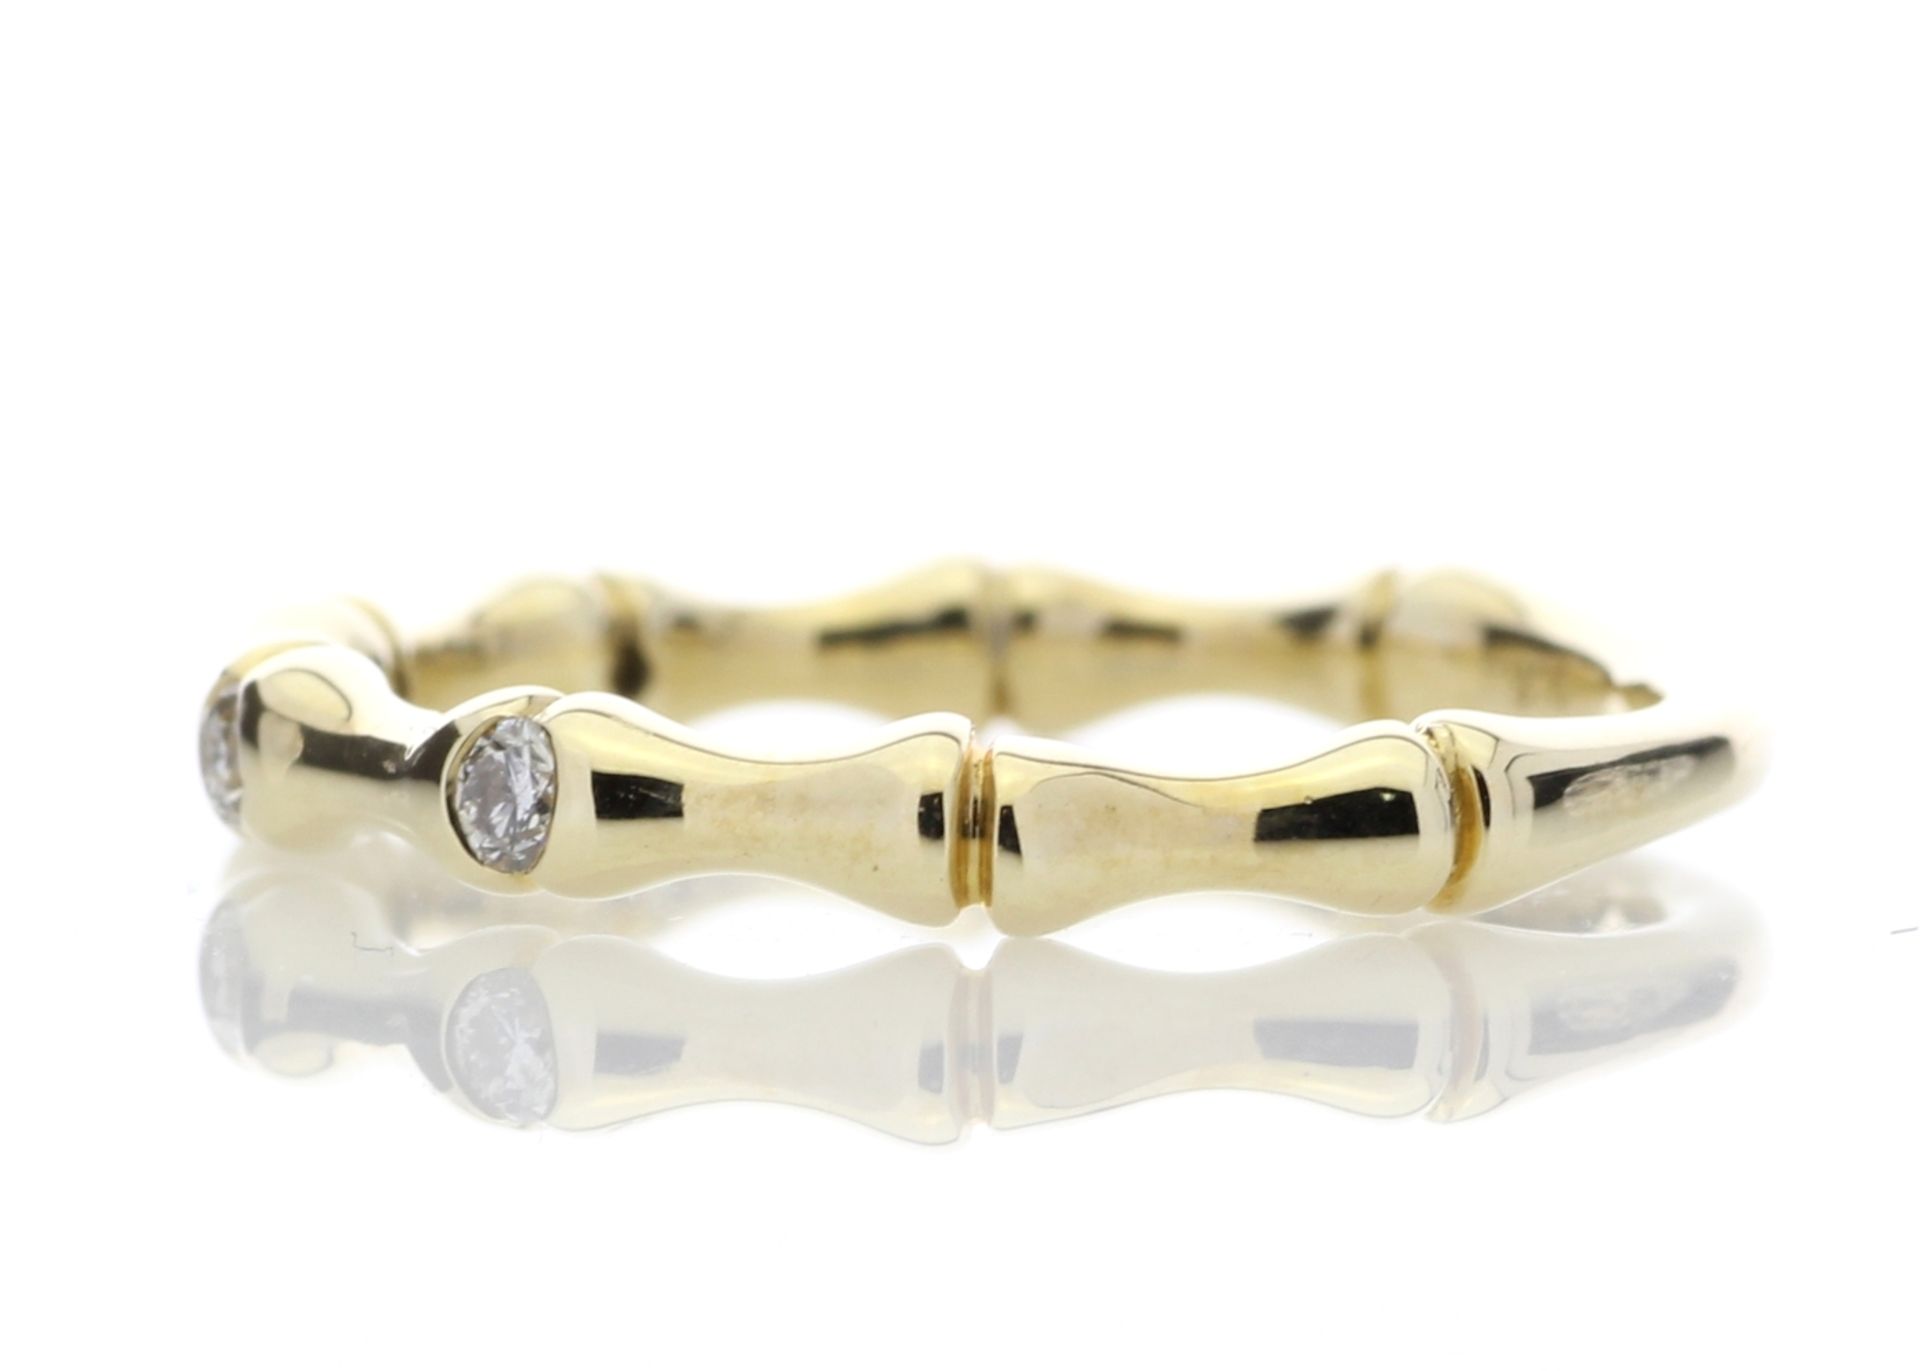 9ct Yellow Gold Diamond Ring 0.12 Carats - Valued by GIE £1,920.00 - 9ct Yellow Gold Diamond Ring - Image 3 of 5